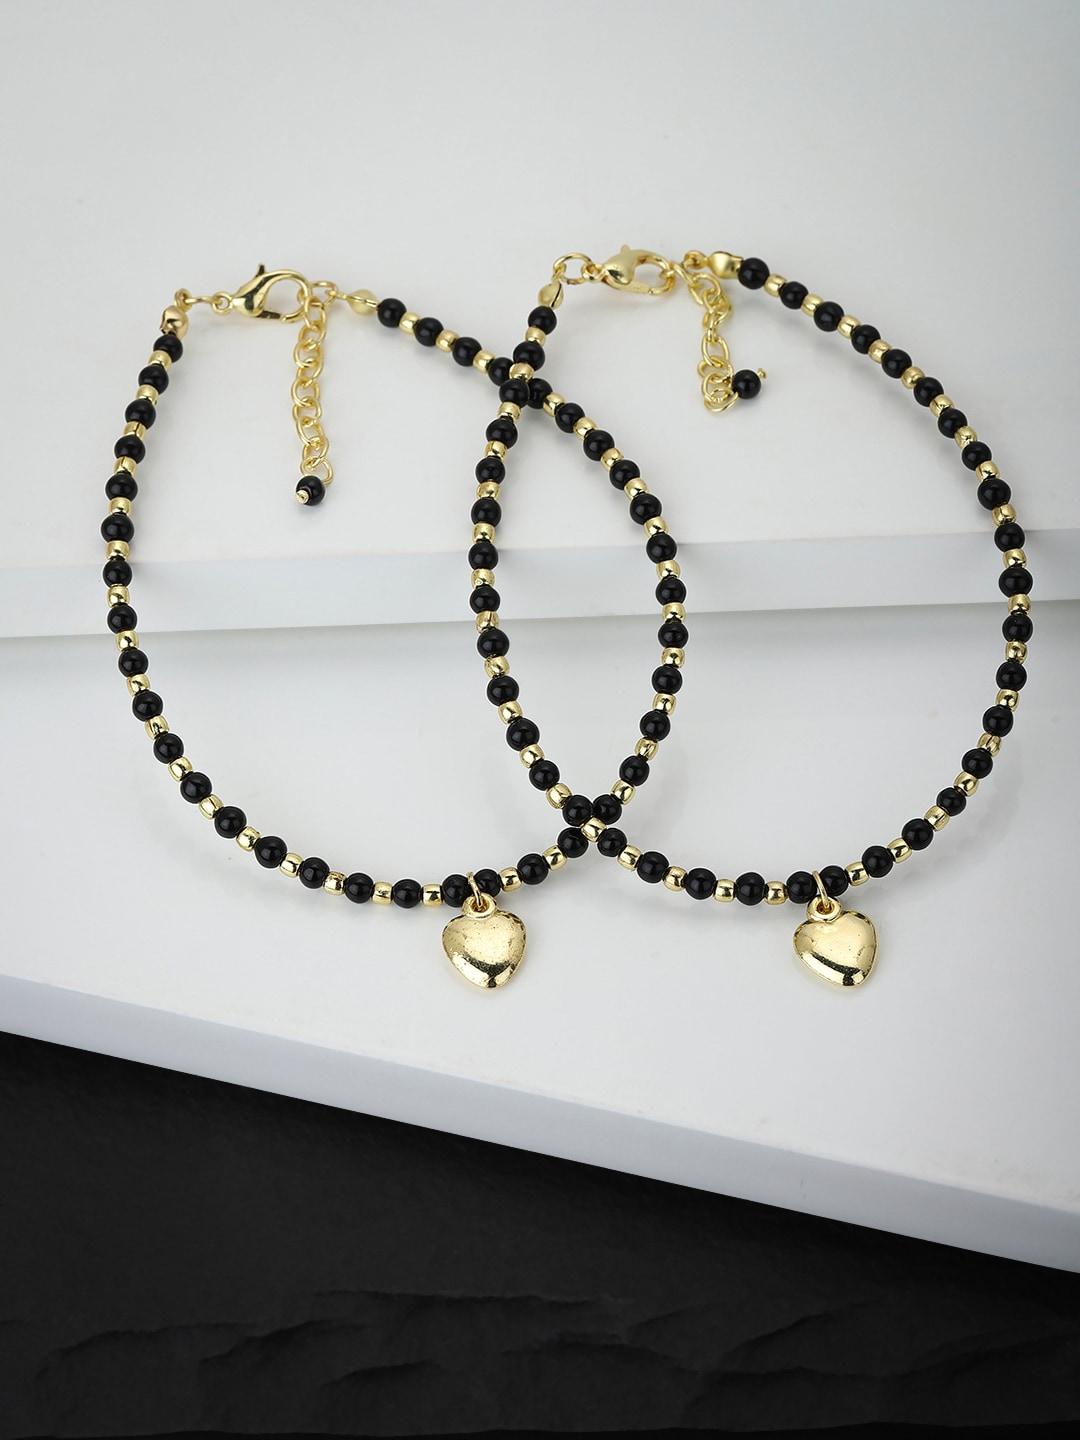 carlton-london-set-of-2-black-&-gold-toned-beaded-anklets-with-heart-charm-detail